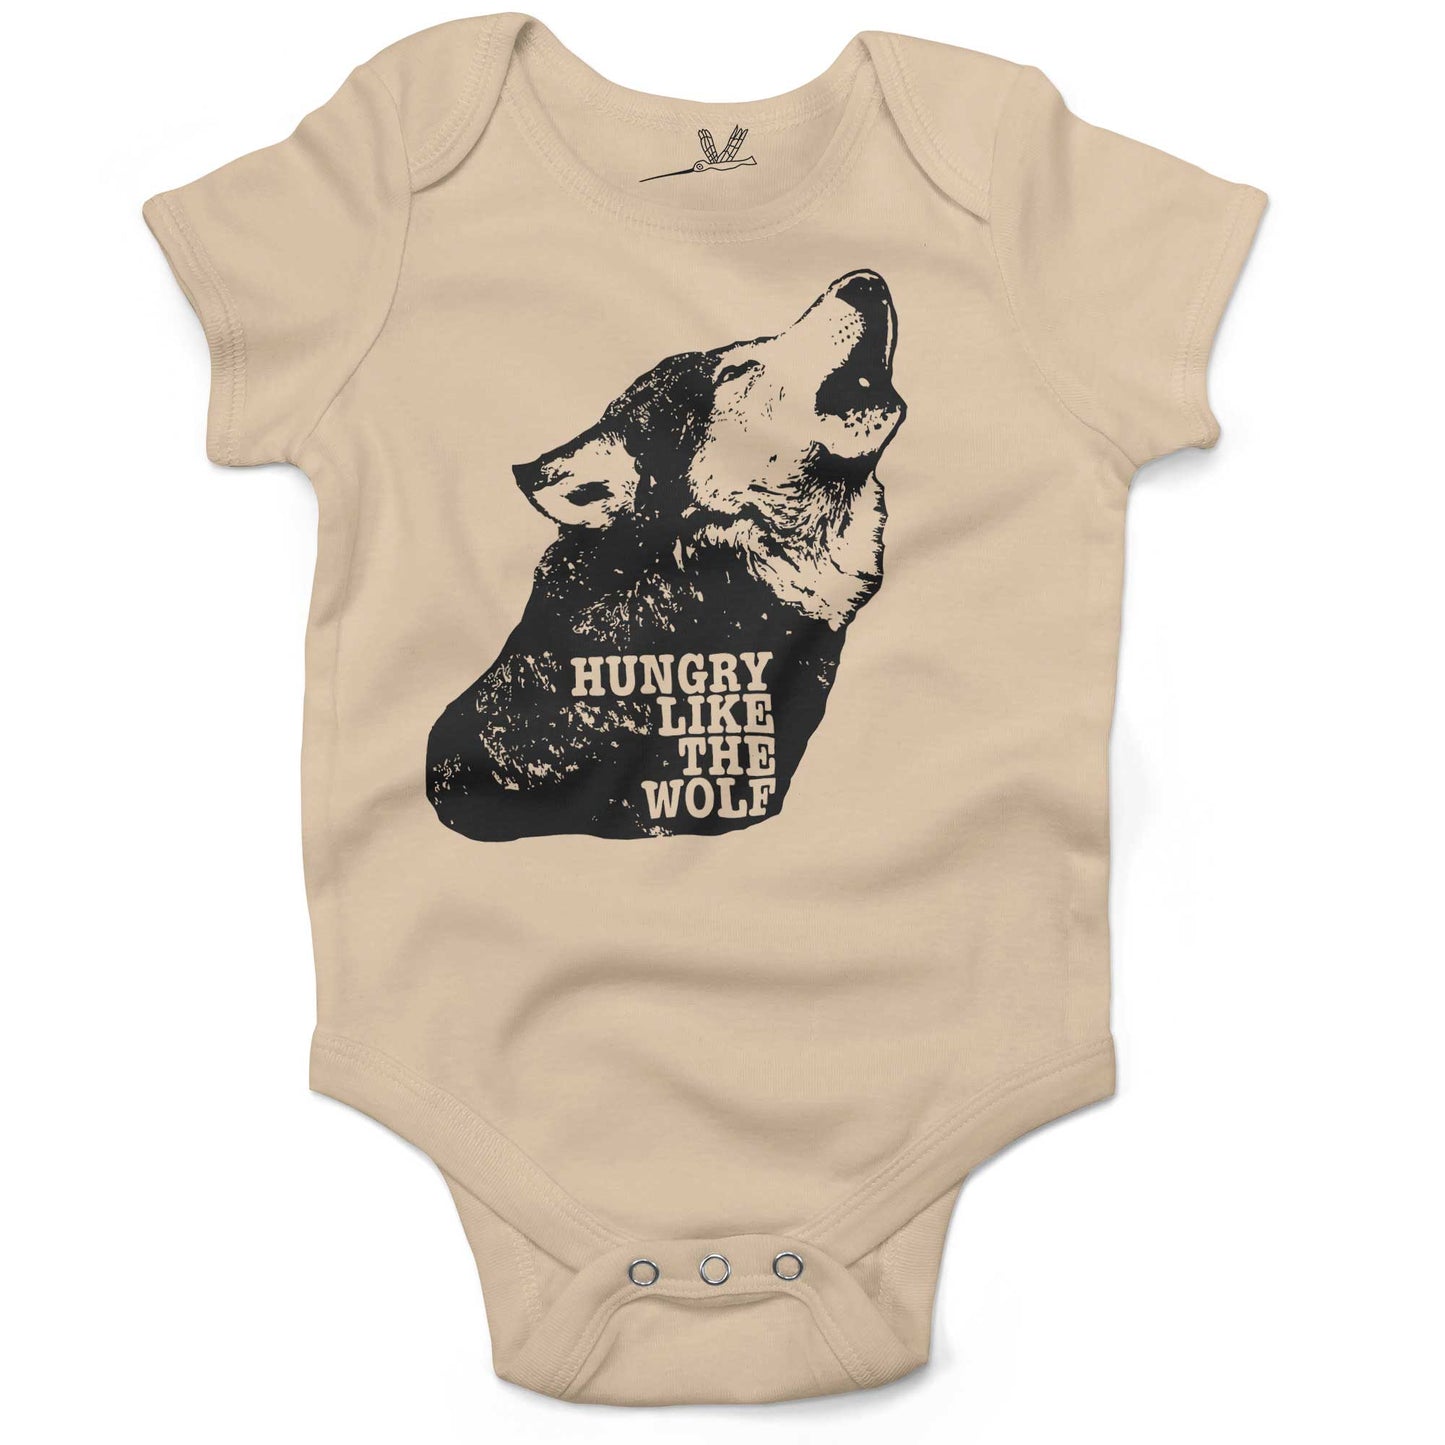 Hungry Like The Wolf Infant Bodysuit or Raglan Baby Tee-Organic Natural-3-6 months